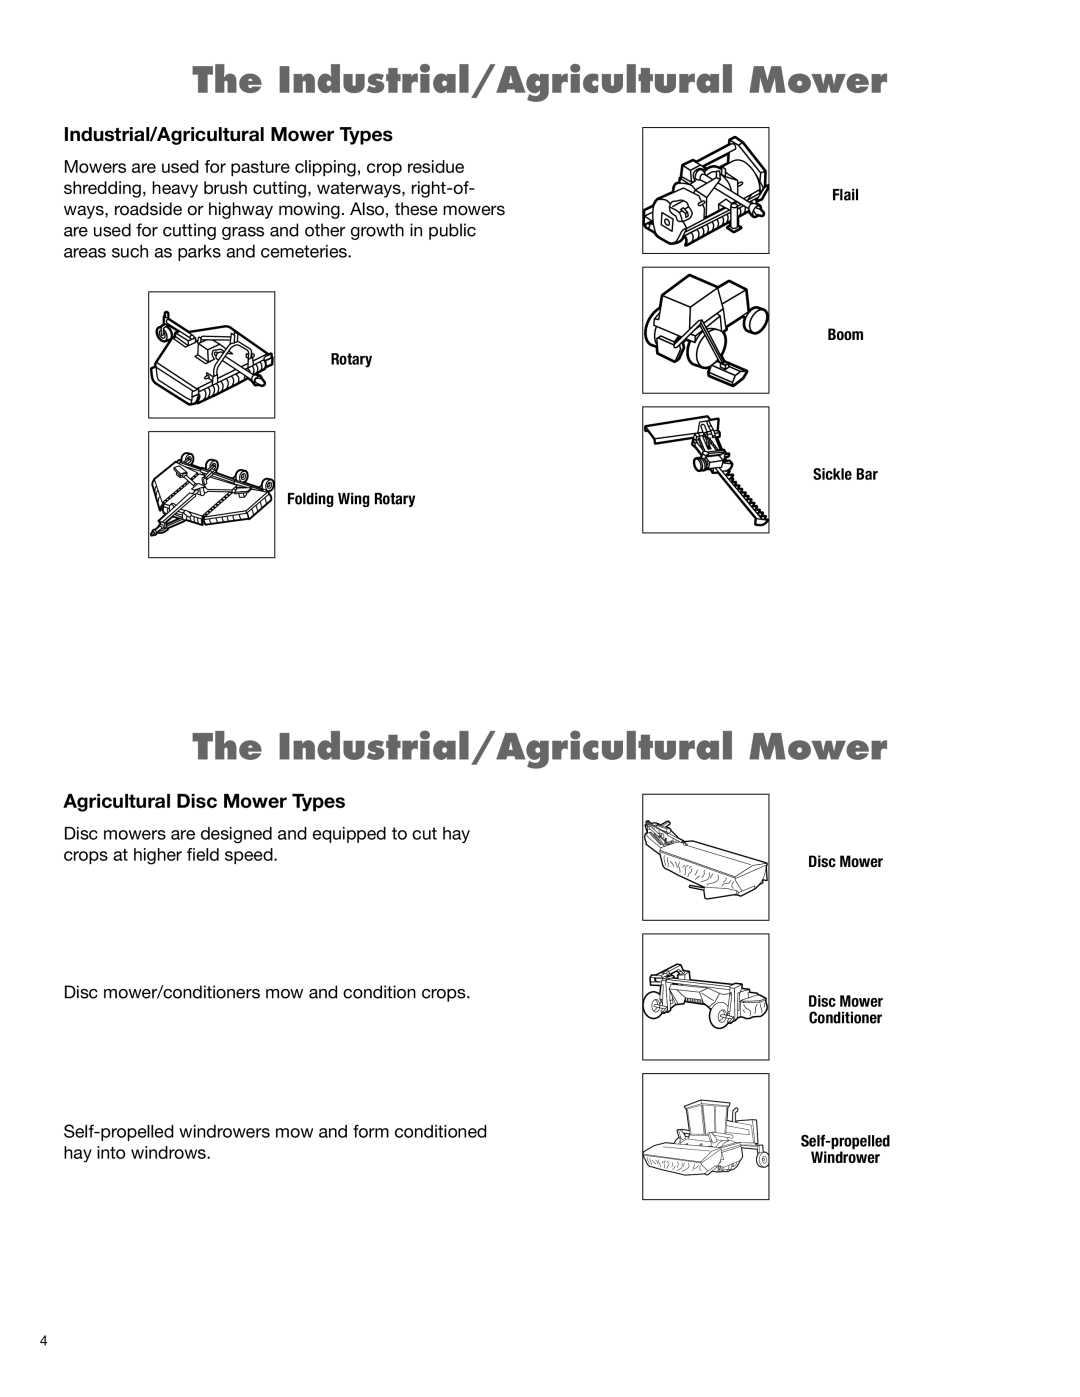 Alamo 1900 manual The Industrial/Agricultural Mower, Industrial/Agricultural Mower Types, Agricultural Disc Mower Types 